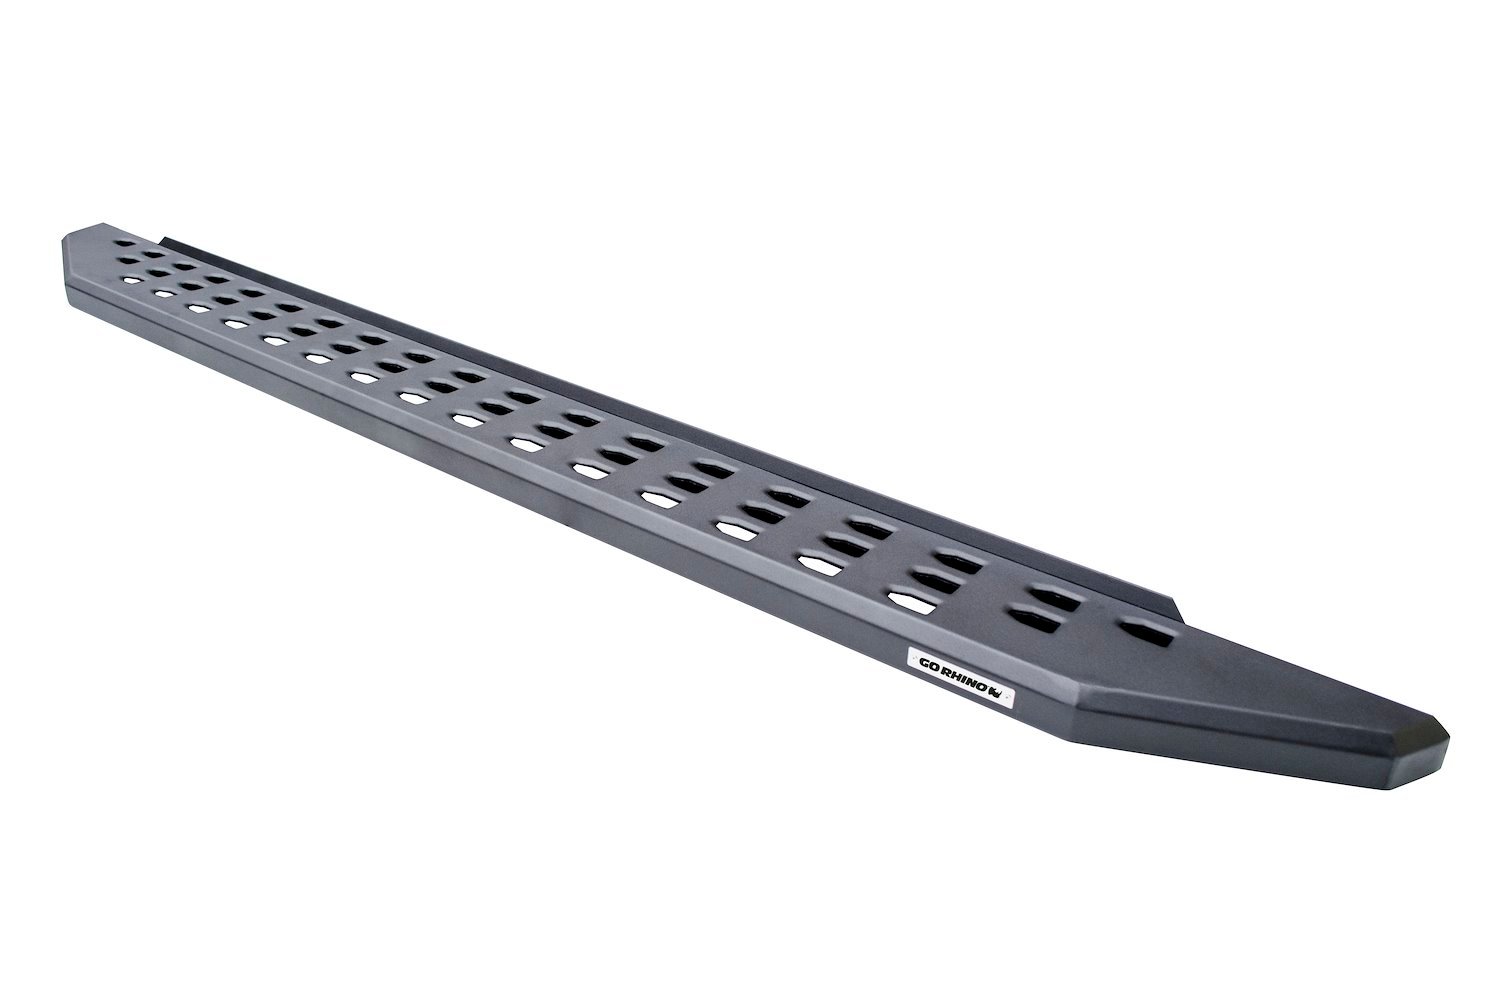 RB20 Running boards for 2004-2014 Ford F150